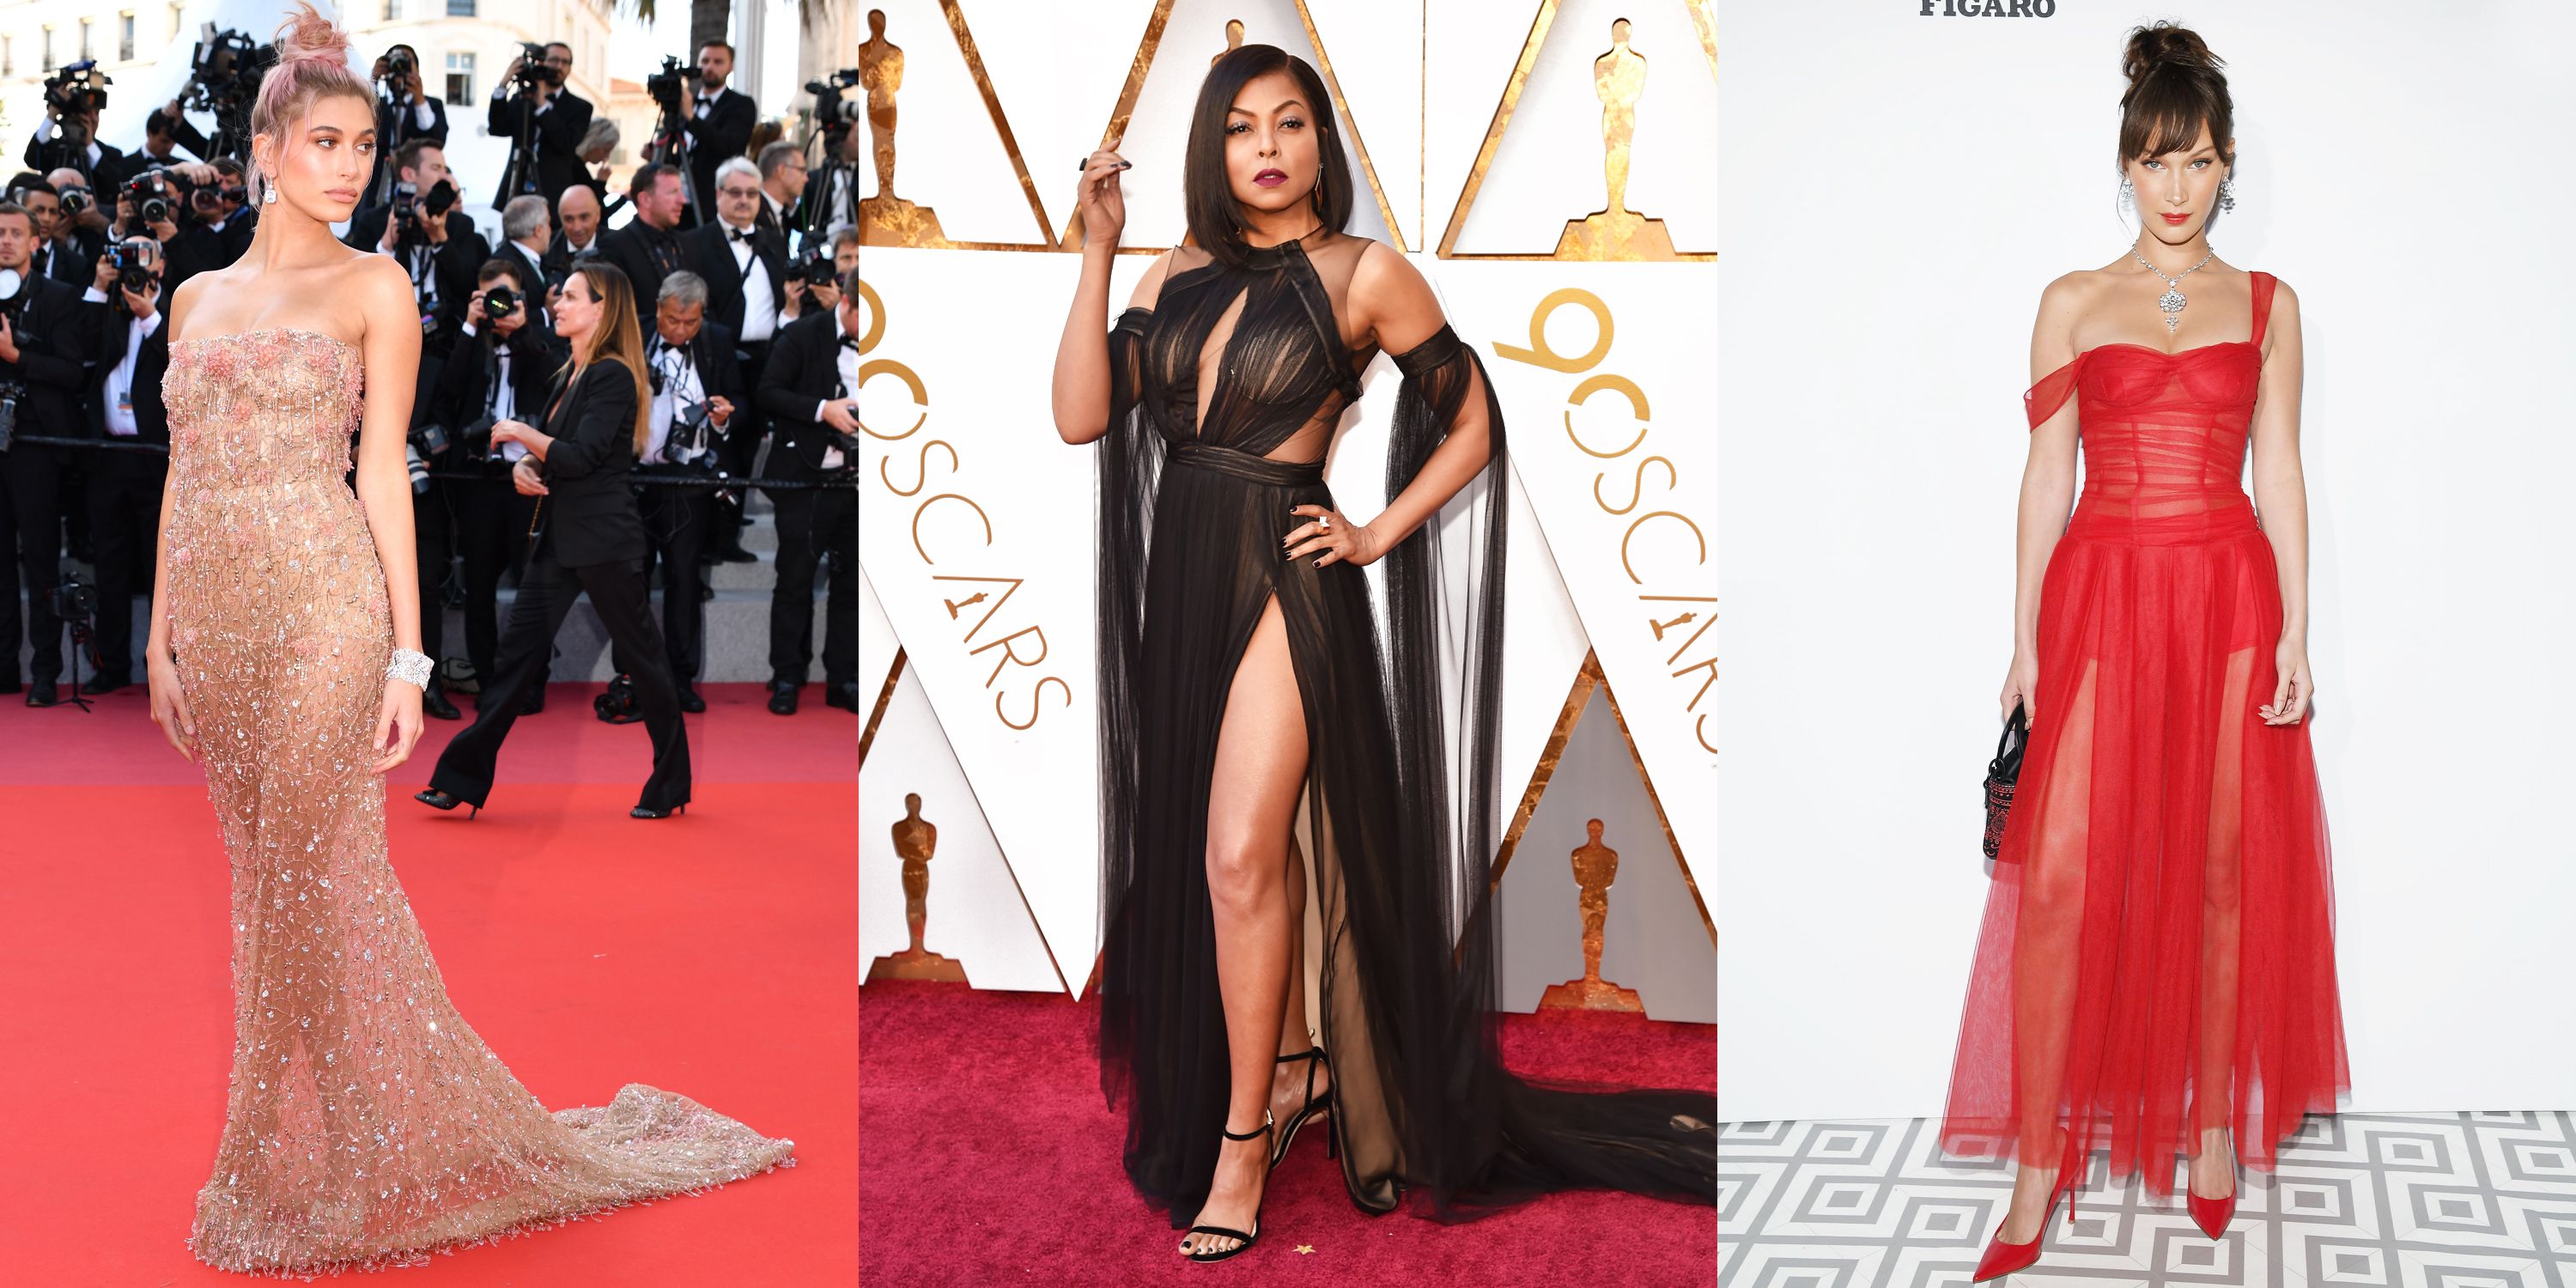 The Most Naked Red Carpet Outfits of 